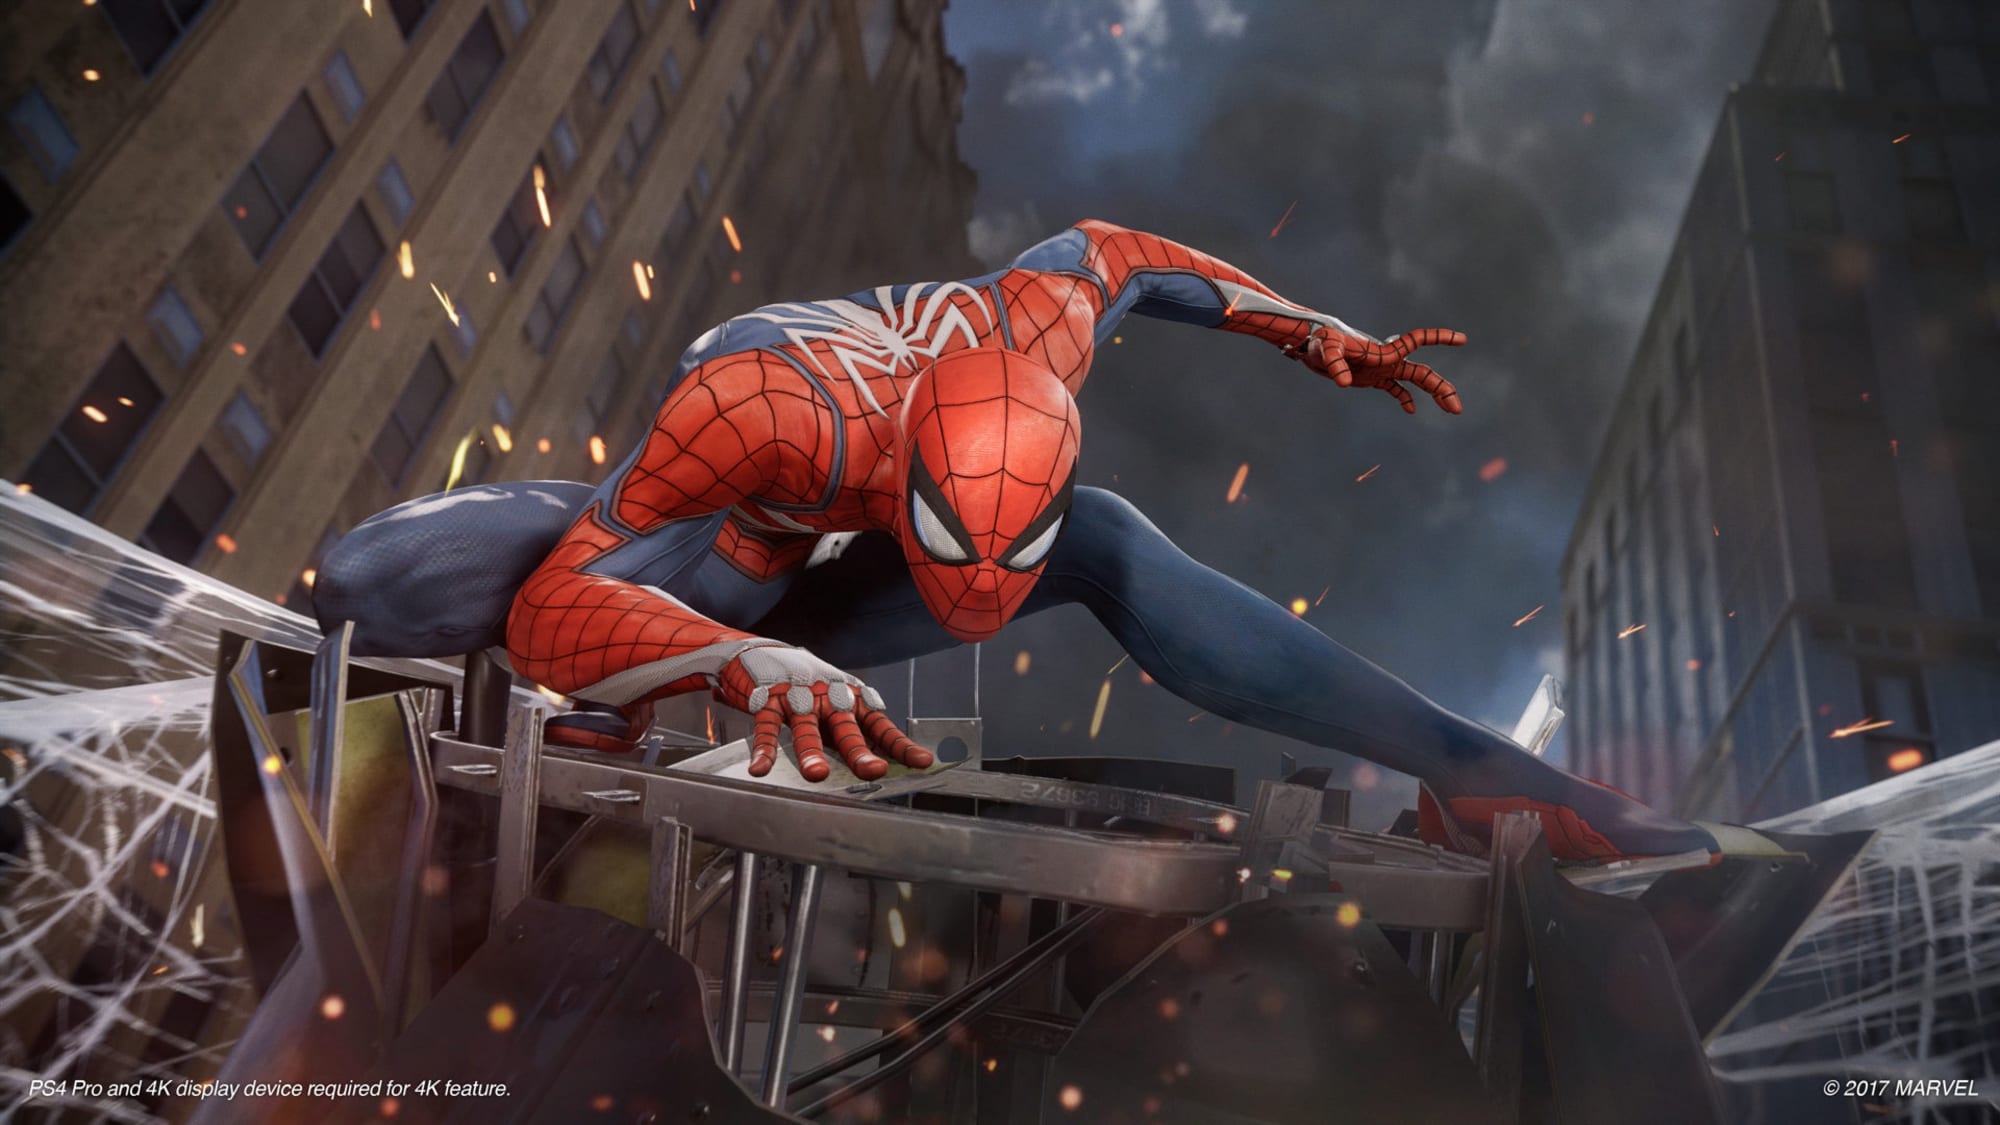 New Spider-Man trailer formally introduces the cast